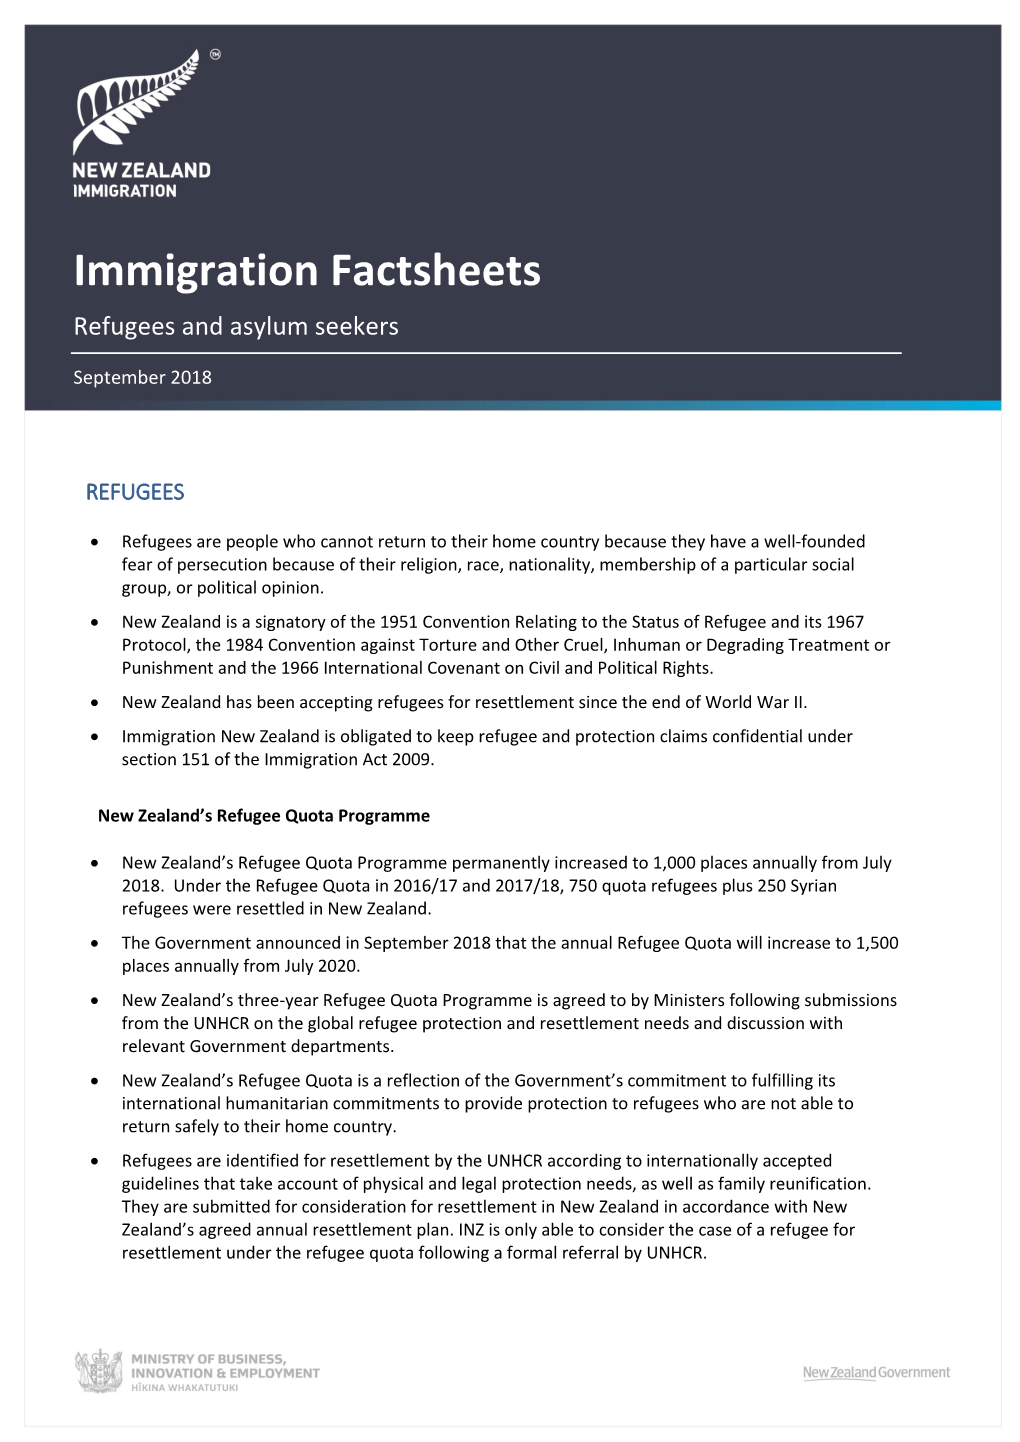 Immigration Media Factsheet: Refugees and Asylum Seekers